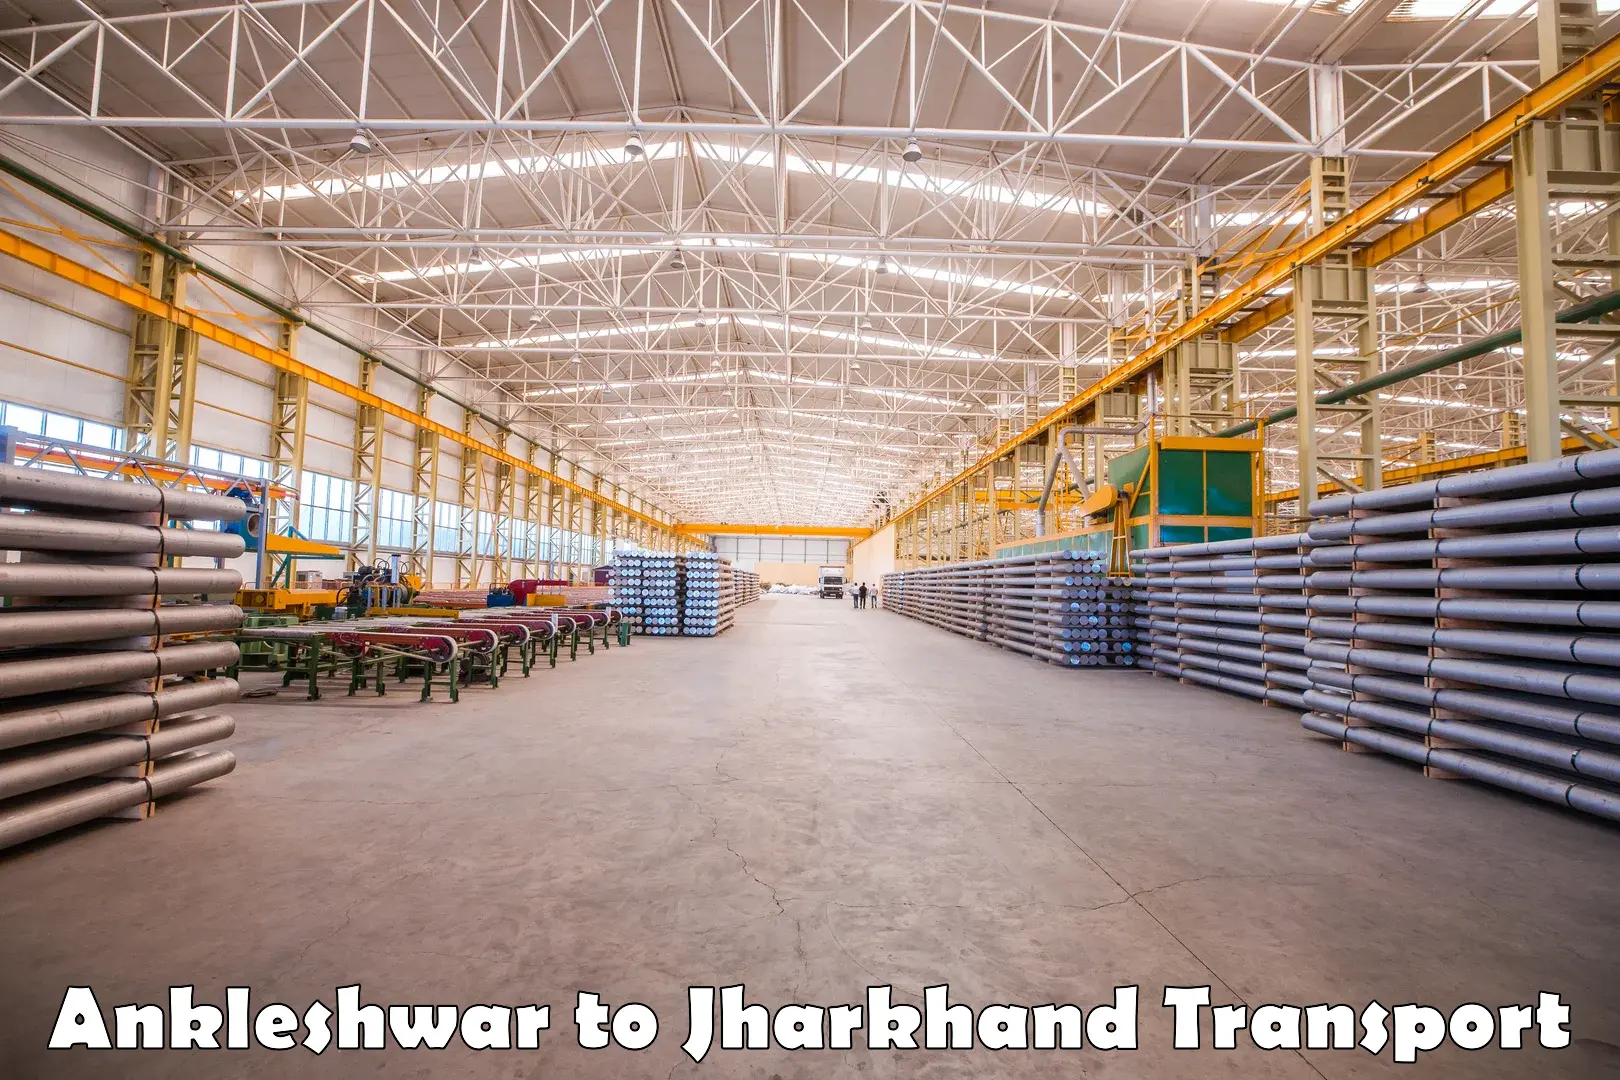 Truck transport companies in India Ankleshwar to Jharkhand